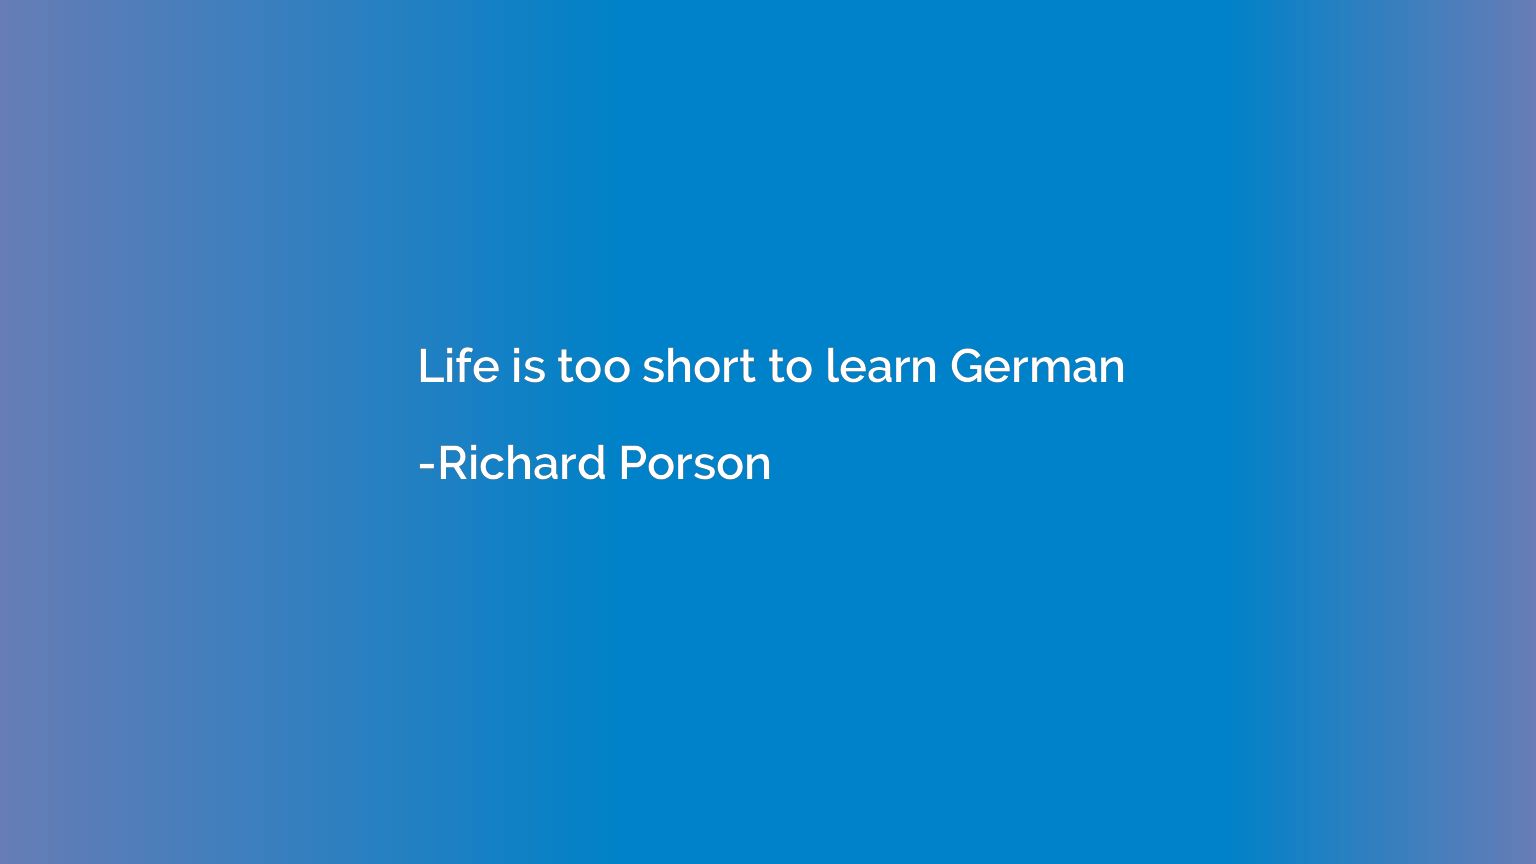 Life is too short to learn German